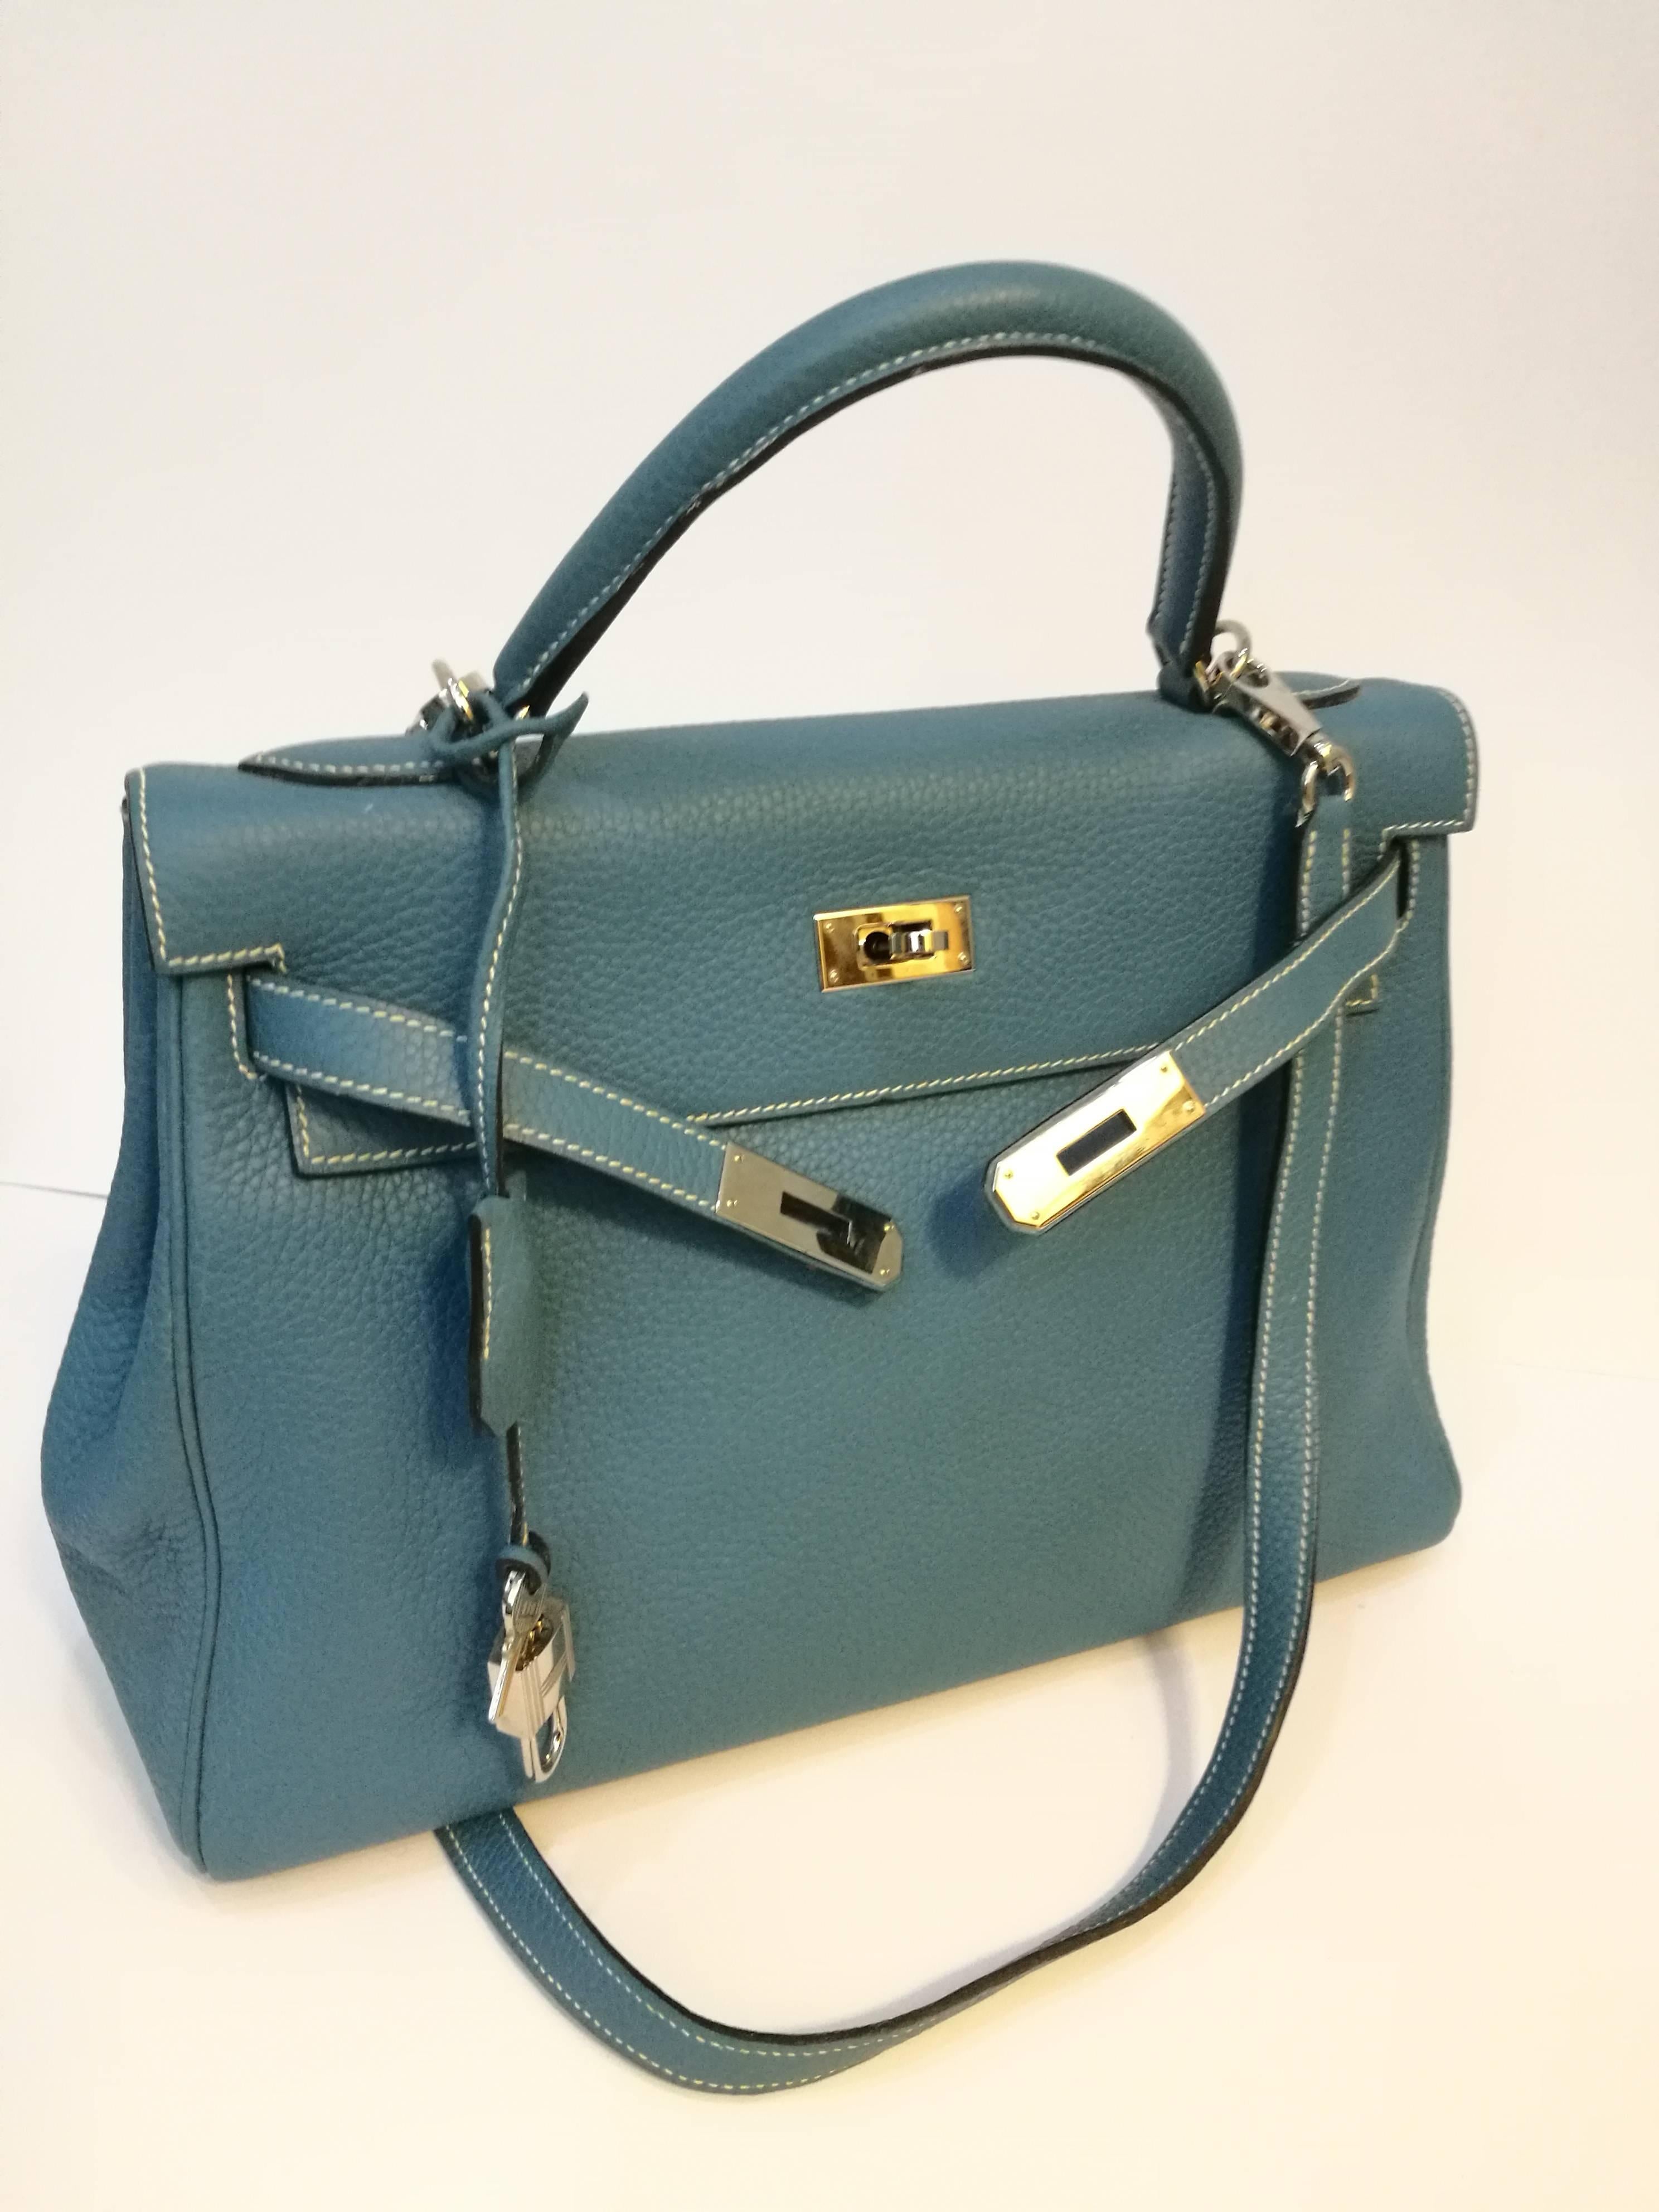 Hermes Light Blue Leather Kelly Bag

Silver tone hardware

Totally made in france